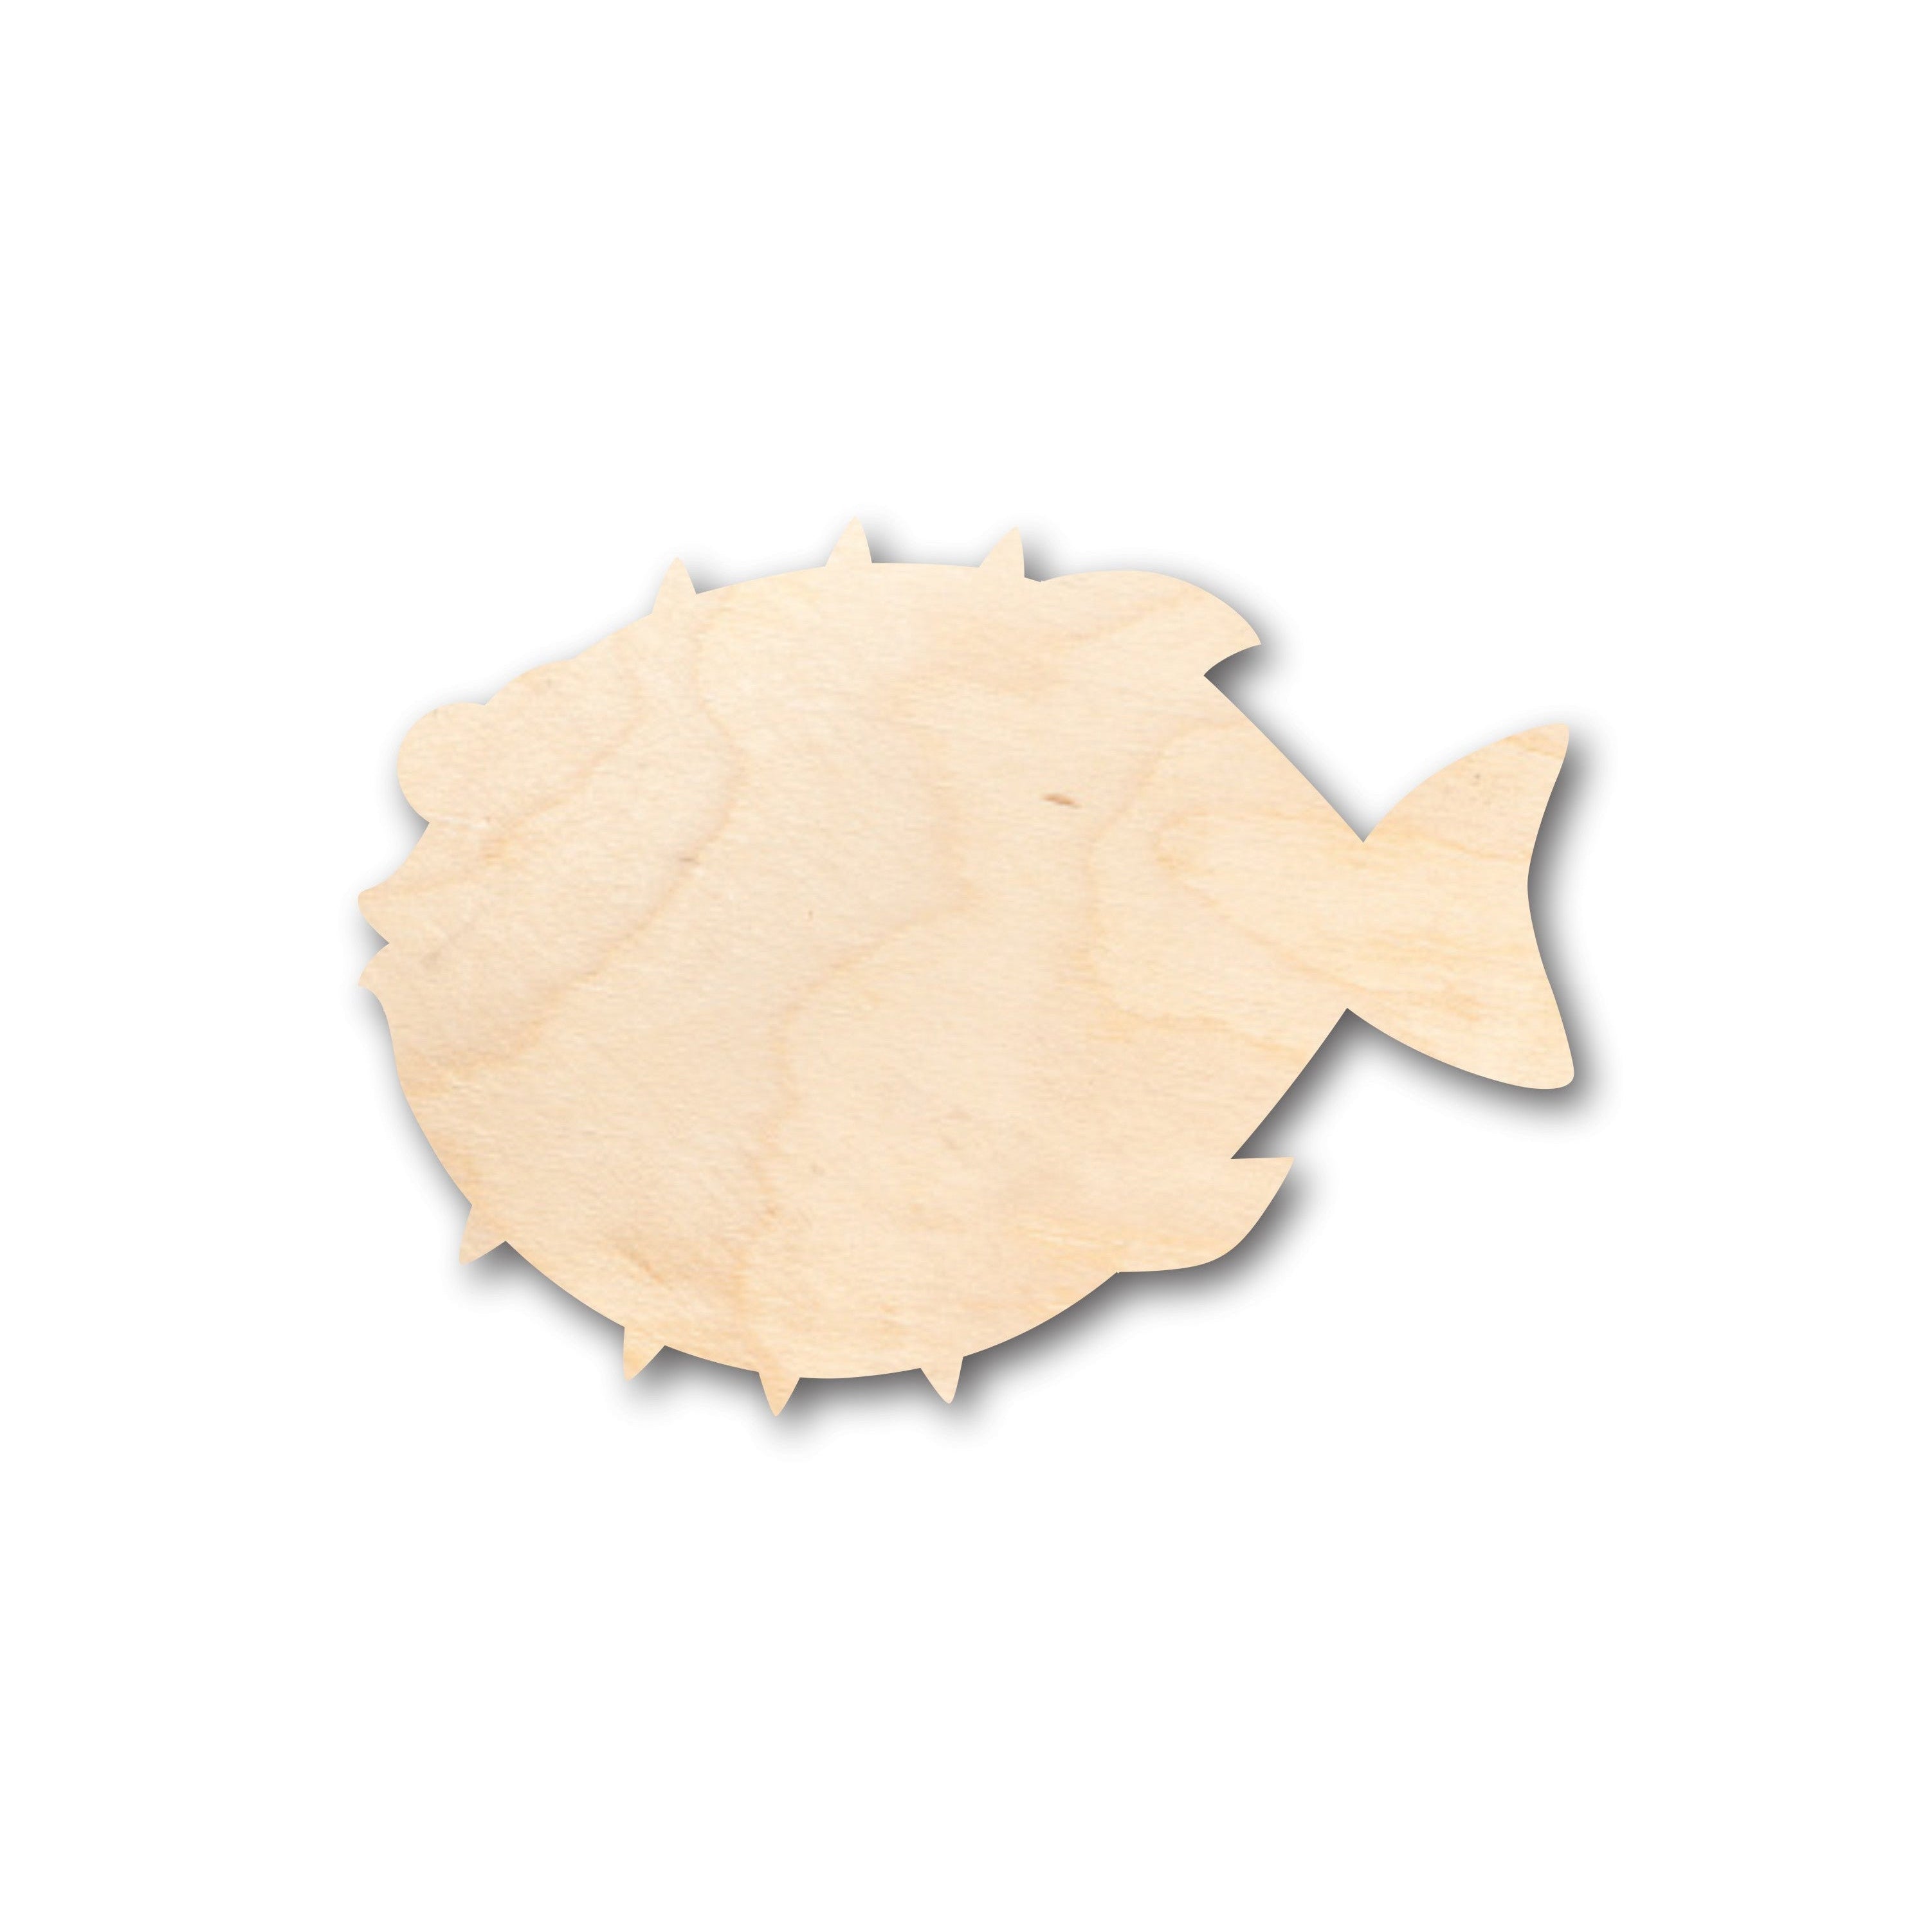 Unfinished Wood Puffer Fish Shape - Craft - up to 36